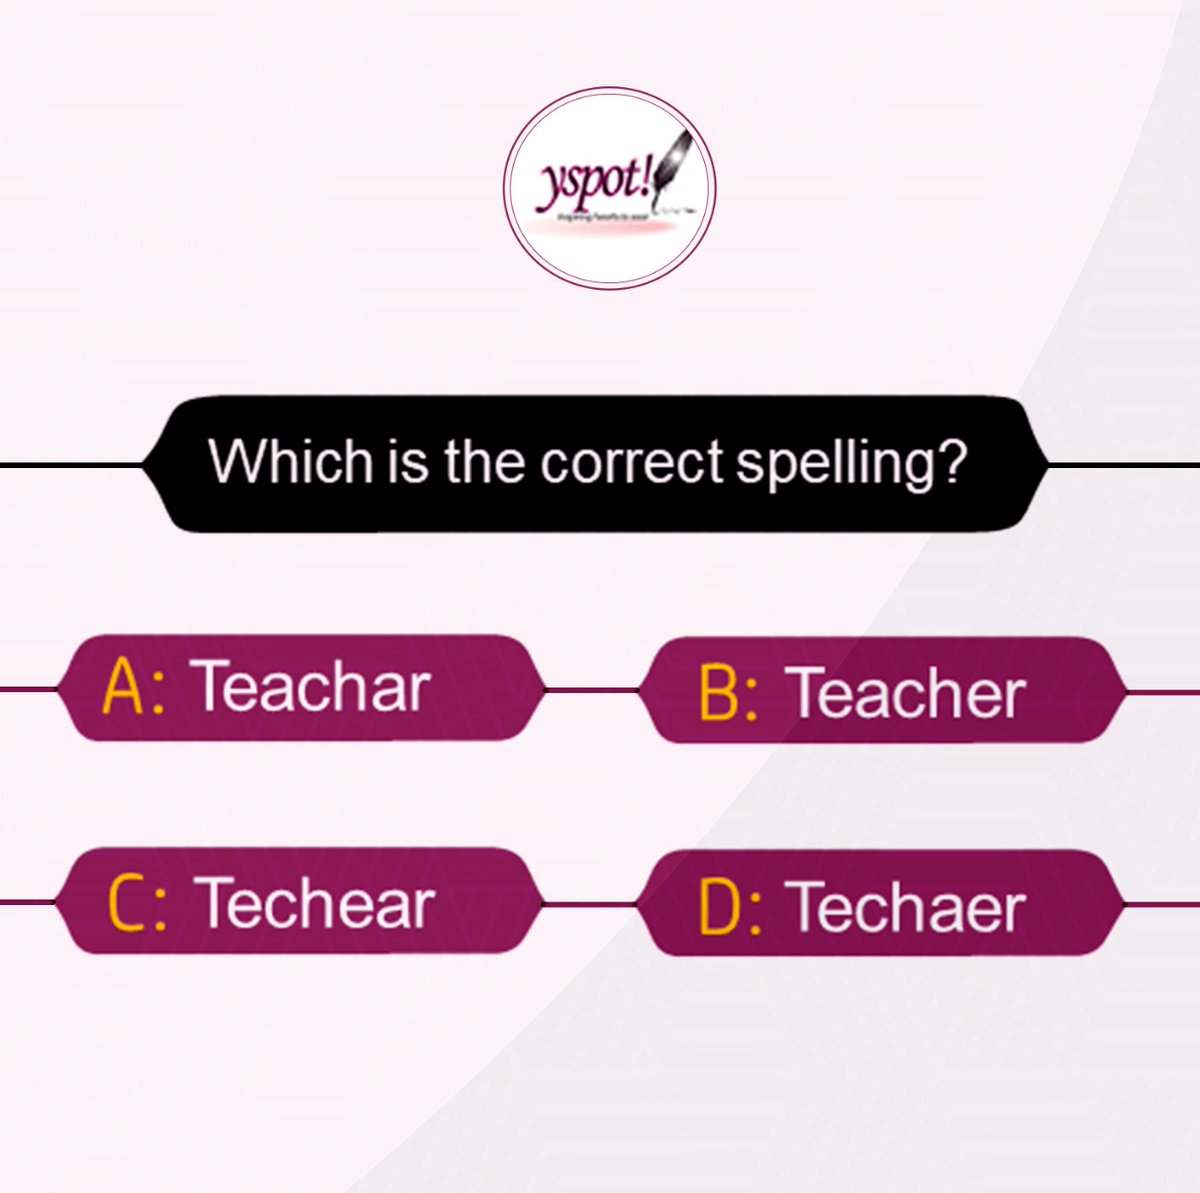 Let's see your answers in the comment section 💃💃💃

#SmartMinds2024 #SpellingBee #spellingbeecompetition #ArtCreativity
#YoungTalent #FutureLeaders #EducationForAll #GlobalLearning #CreativeMinds
#KnowledgeIsPower